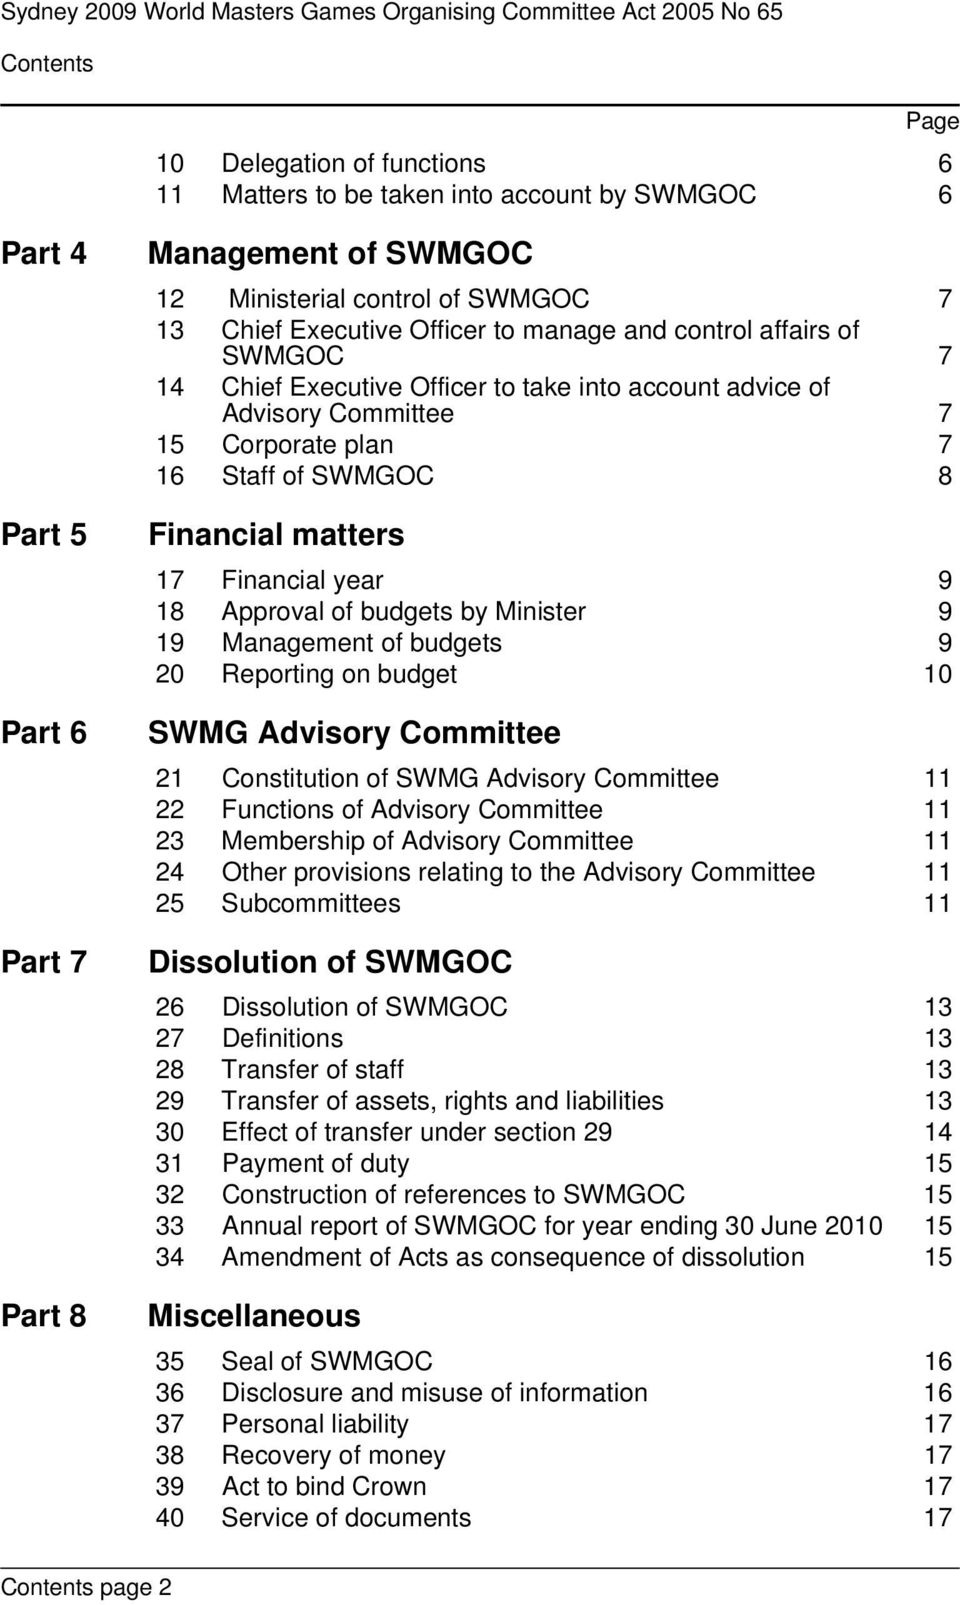 Committee 7 15 Corporate plan 7 16 Staff of SWMGOC 8 Financial matters 17 Financial year 9 18 Approval of budgets by Minister 9 19 Management of budgets 9 20 Reporting on budget 10 SWMG Advisory